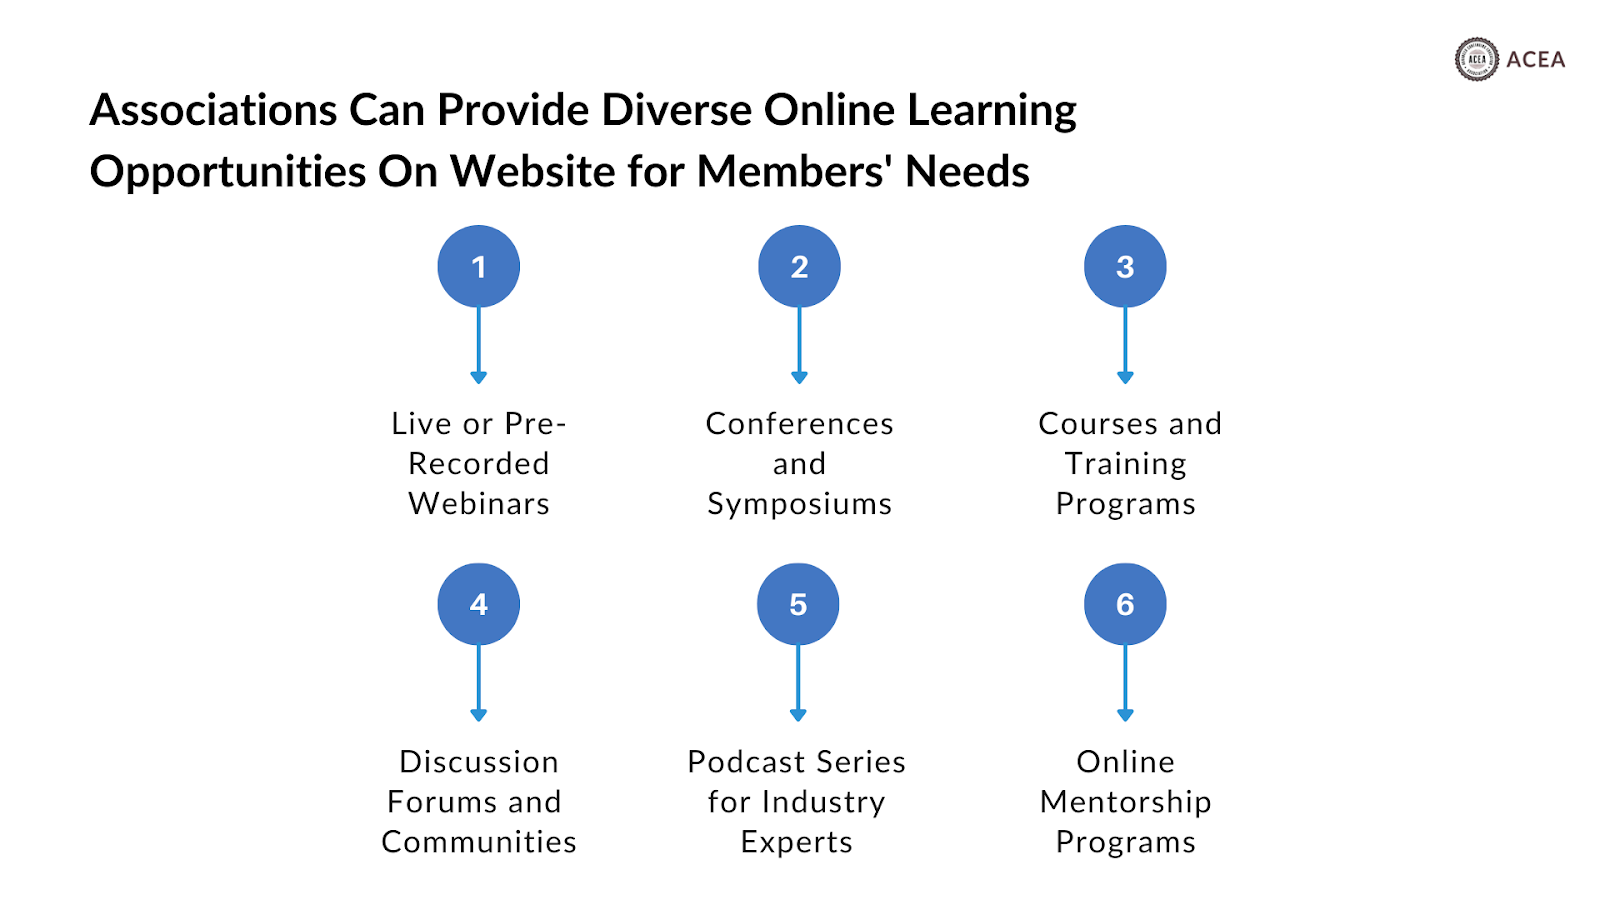 Diverse online learning opportunities on website for member needs